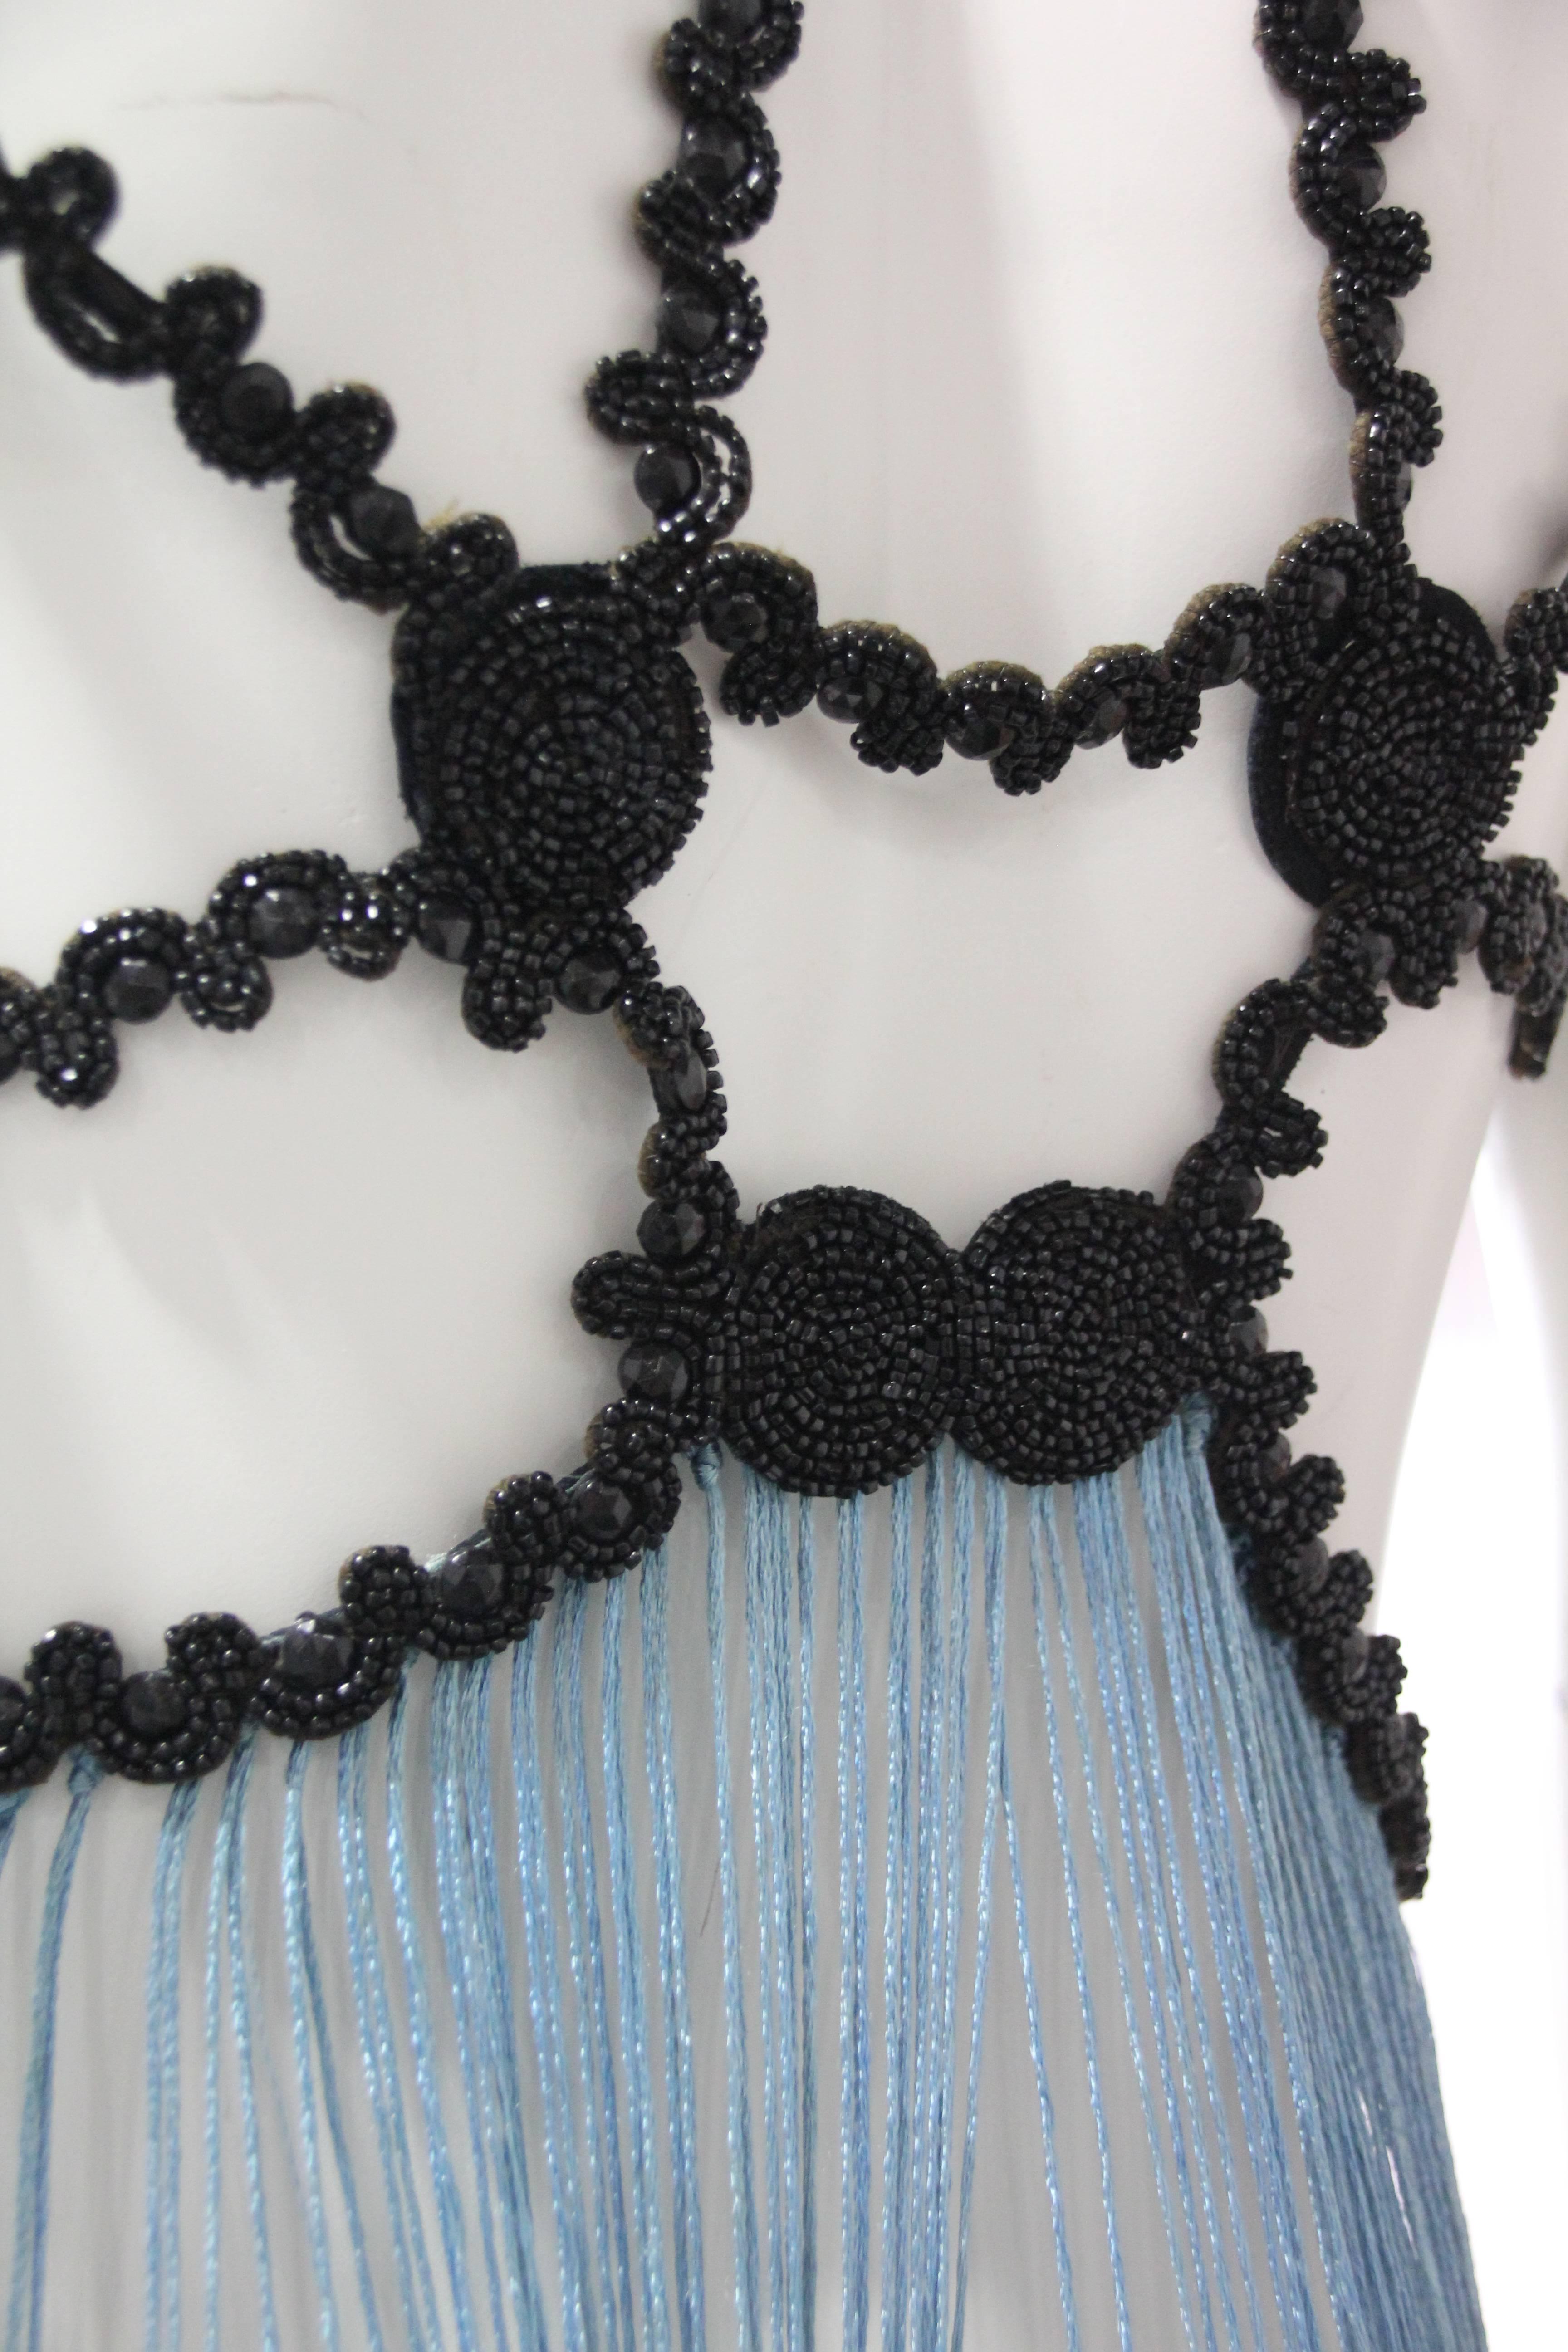 Women's Burlesque Style Beaded Feathered Blue Bralette with Long Ombre Fringe and Beads